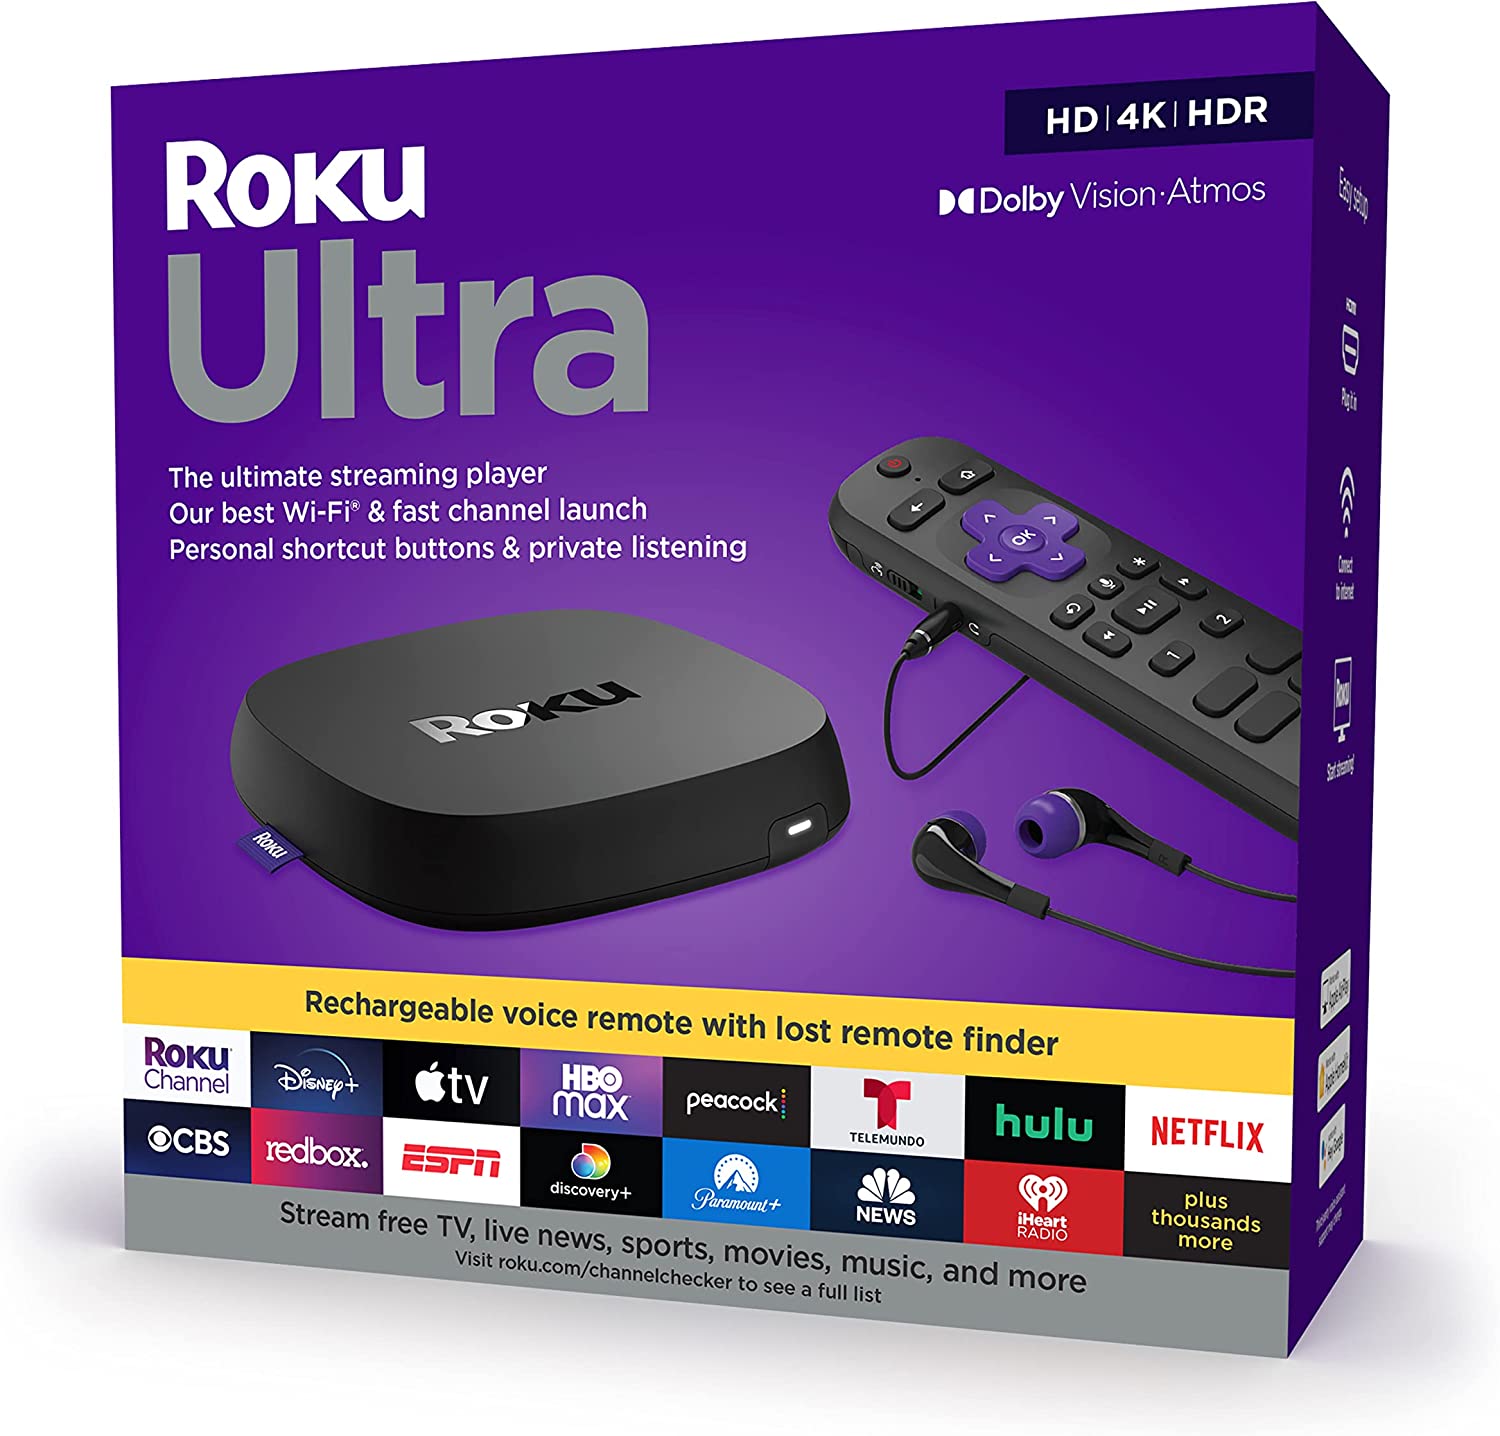 Giveaway! Enter Now to Win a 2022 Roku Ultra, $100 Netflix Gift Card, & $100 in Hulu Gift Cards!